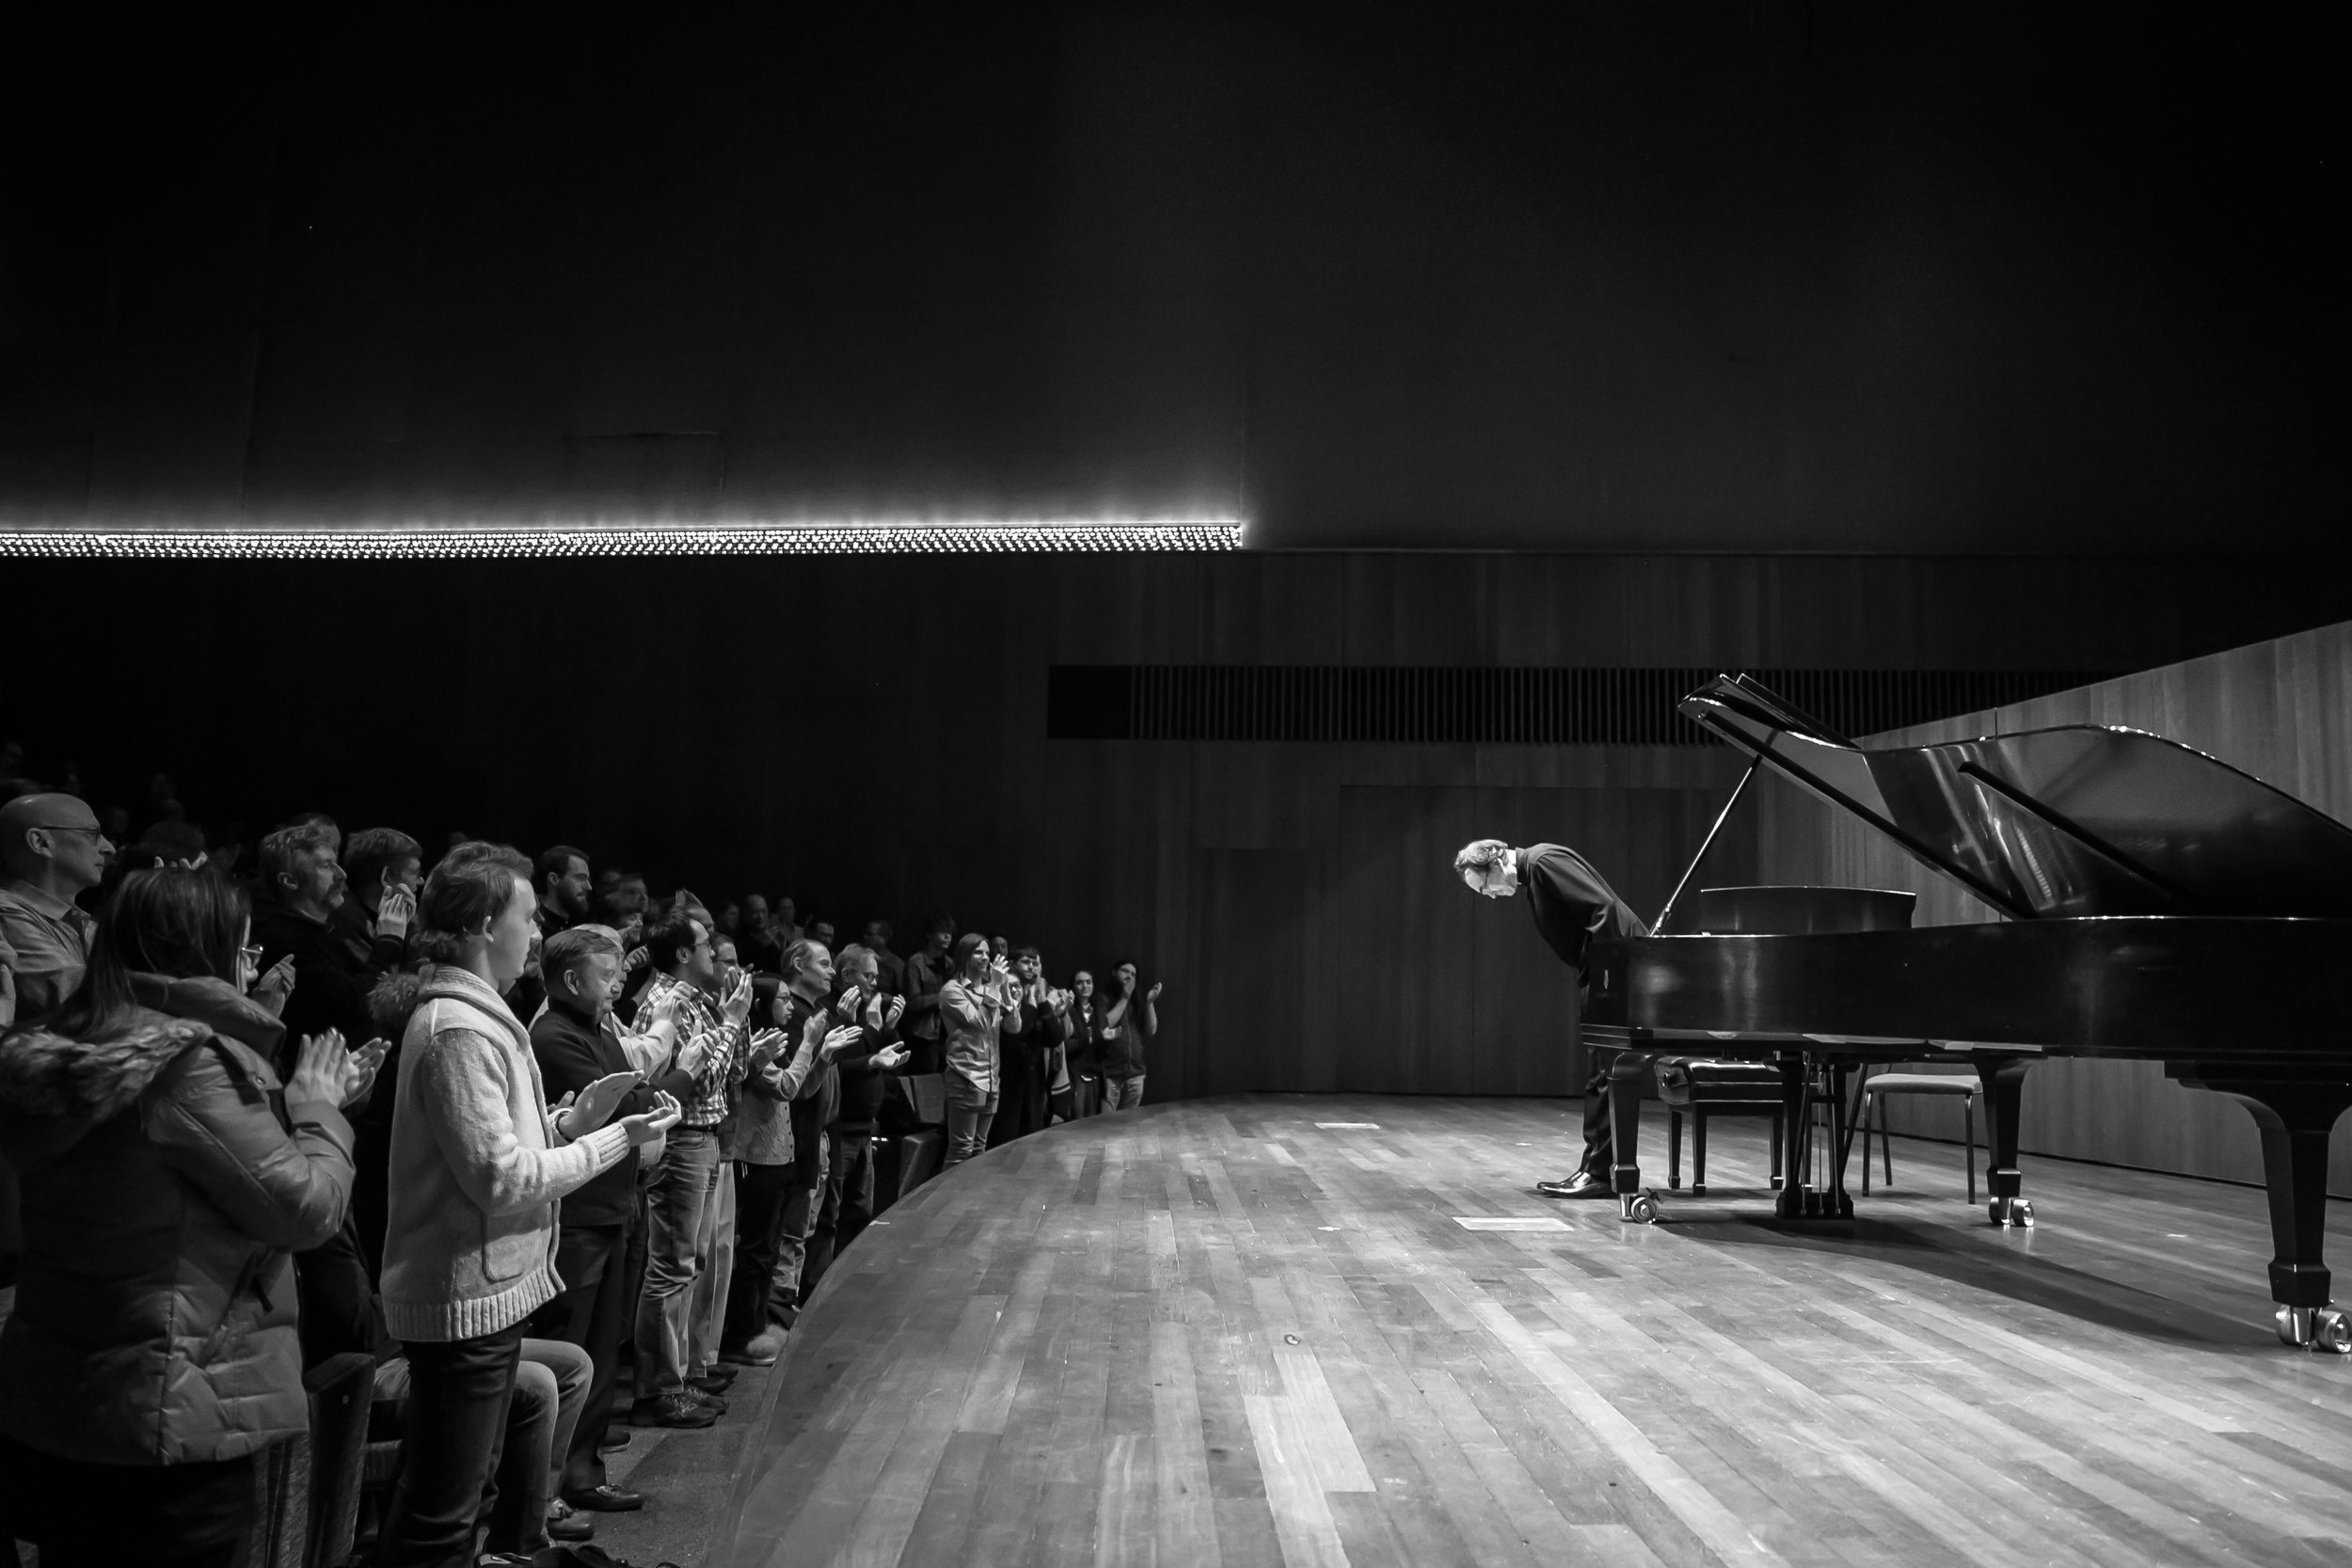  Pianist Pierre-Laurent Aimard takes a final bow after his solo recital for University of Chicago Presents, March 6, 2018.&nbsp; 